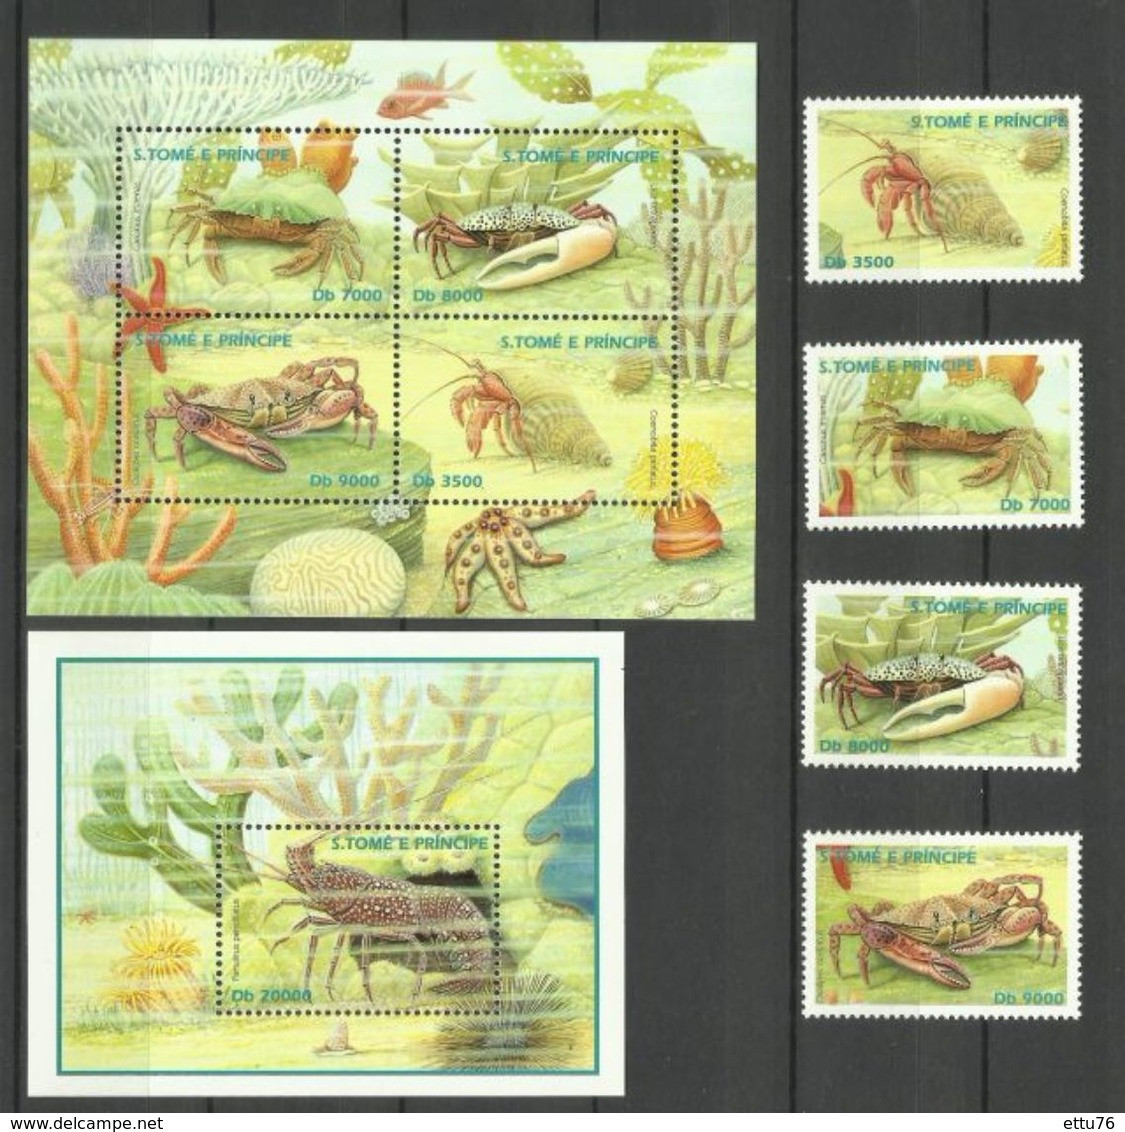 Sao Tome E Principe  2003  Crustaceans,Crabs,Lobsters  Set & Sheets  MNH - Crustaceans